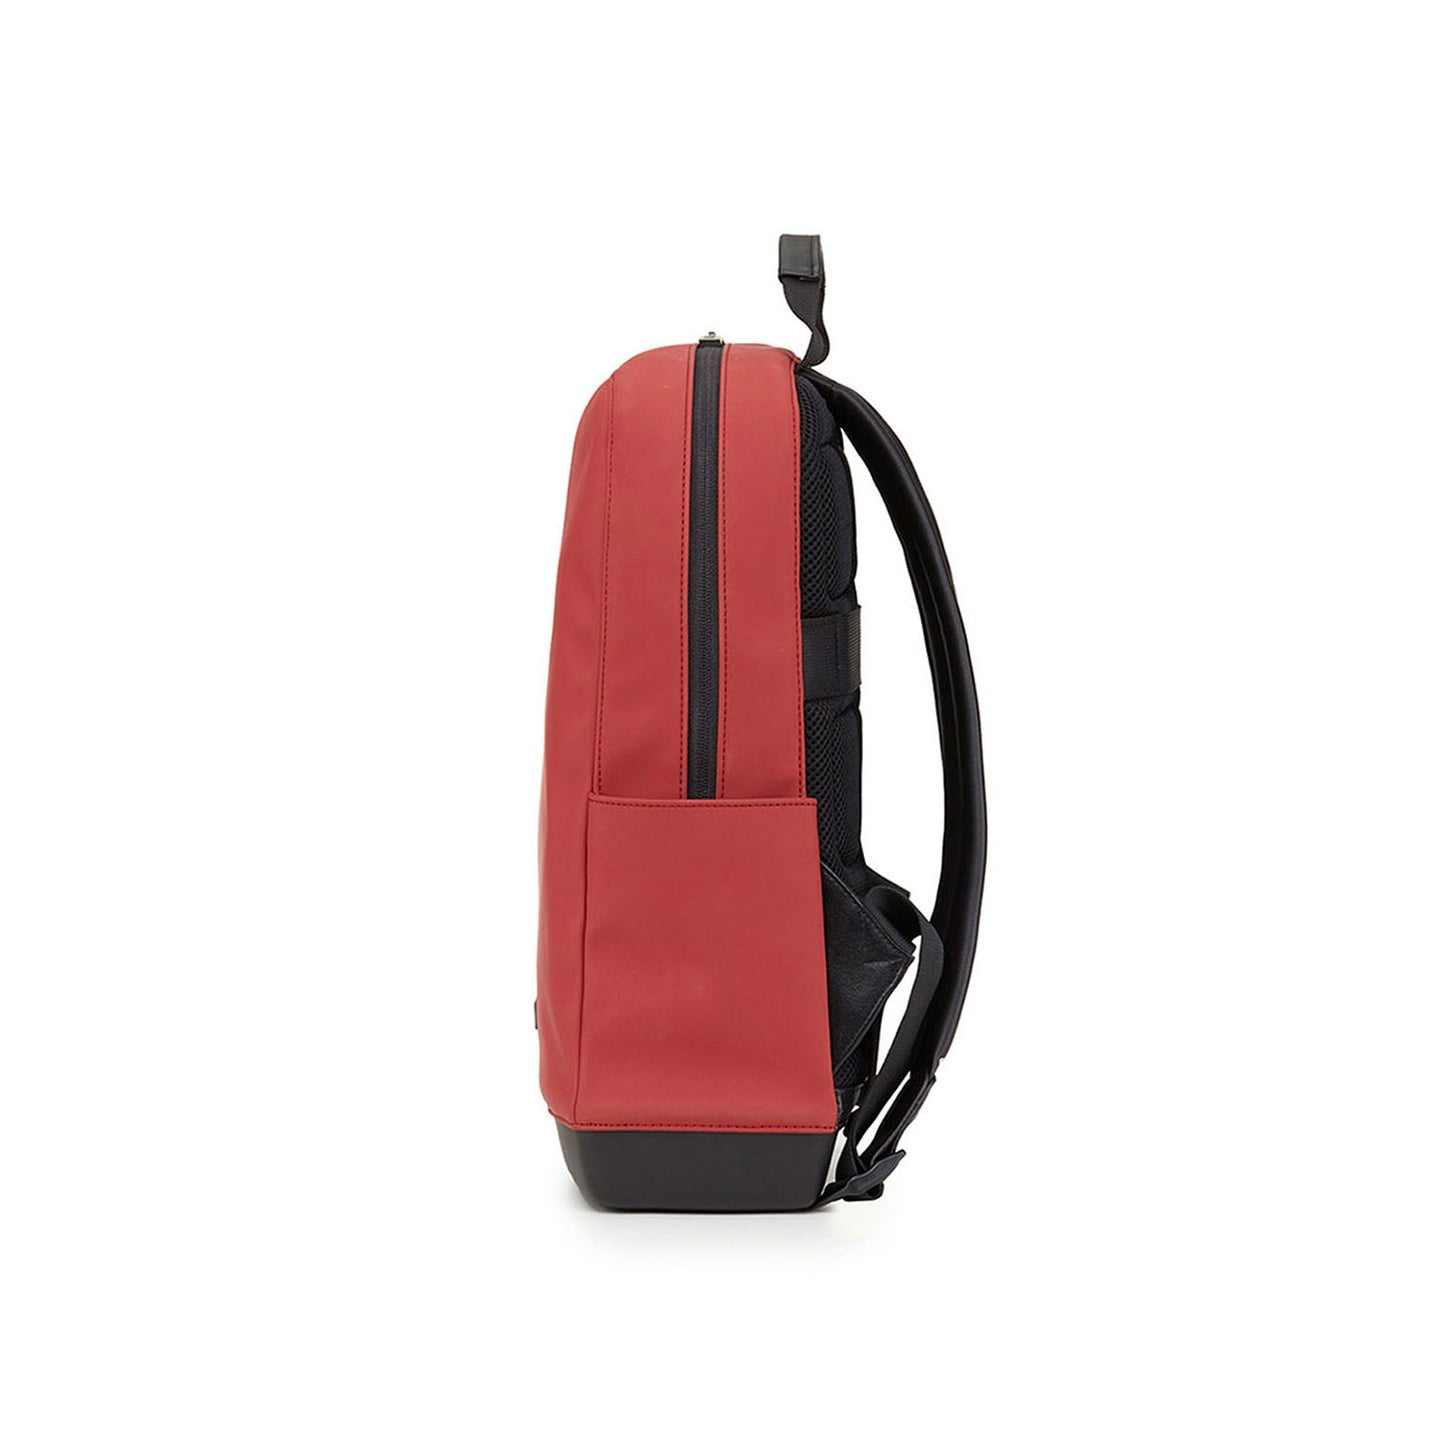 The Backpack Collection Soft Touch Burgundy Red